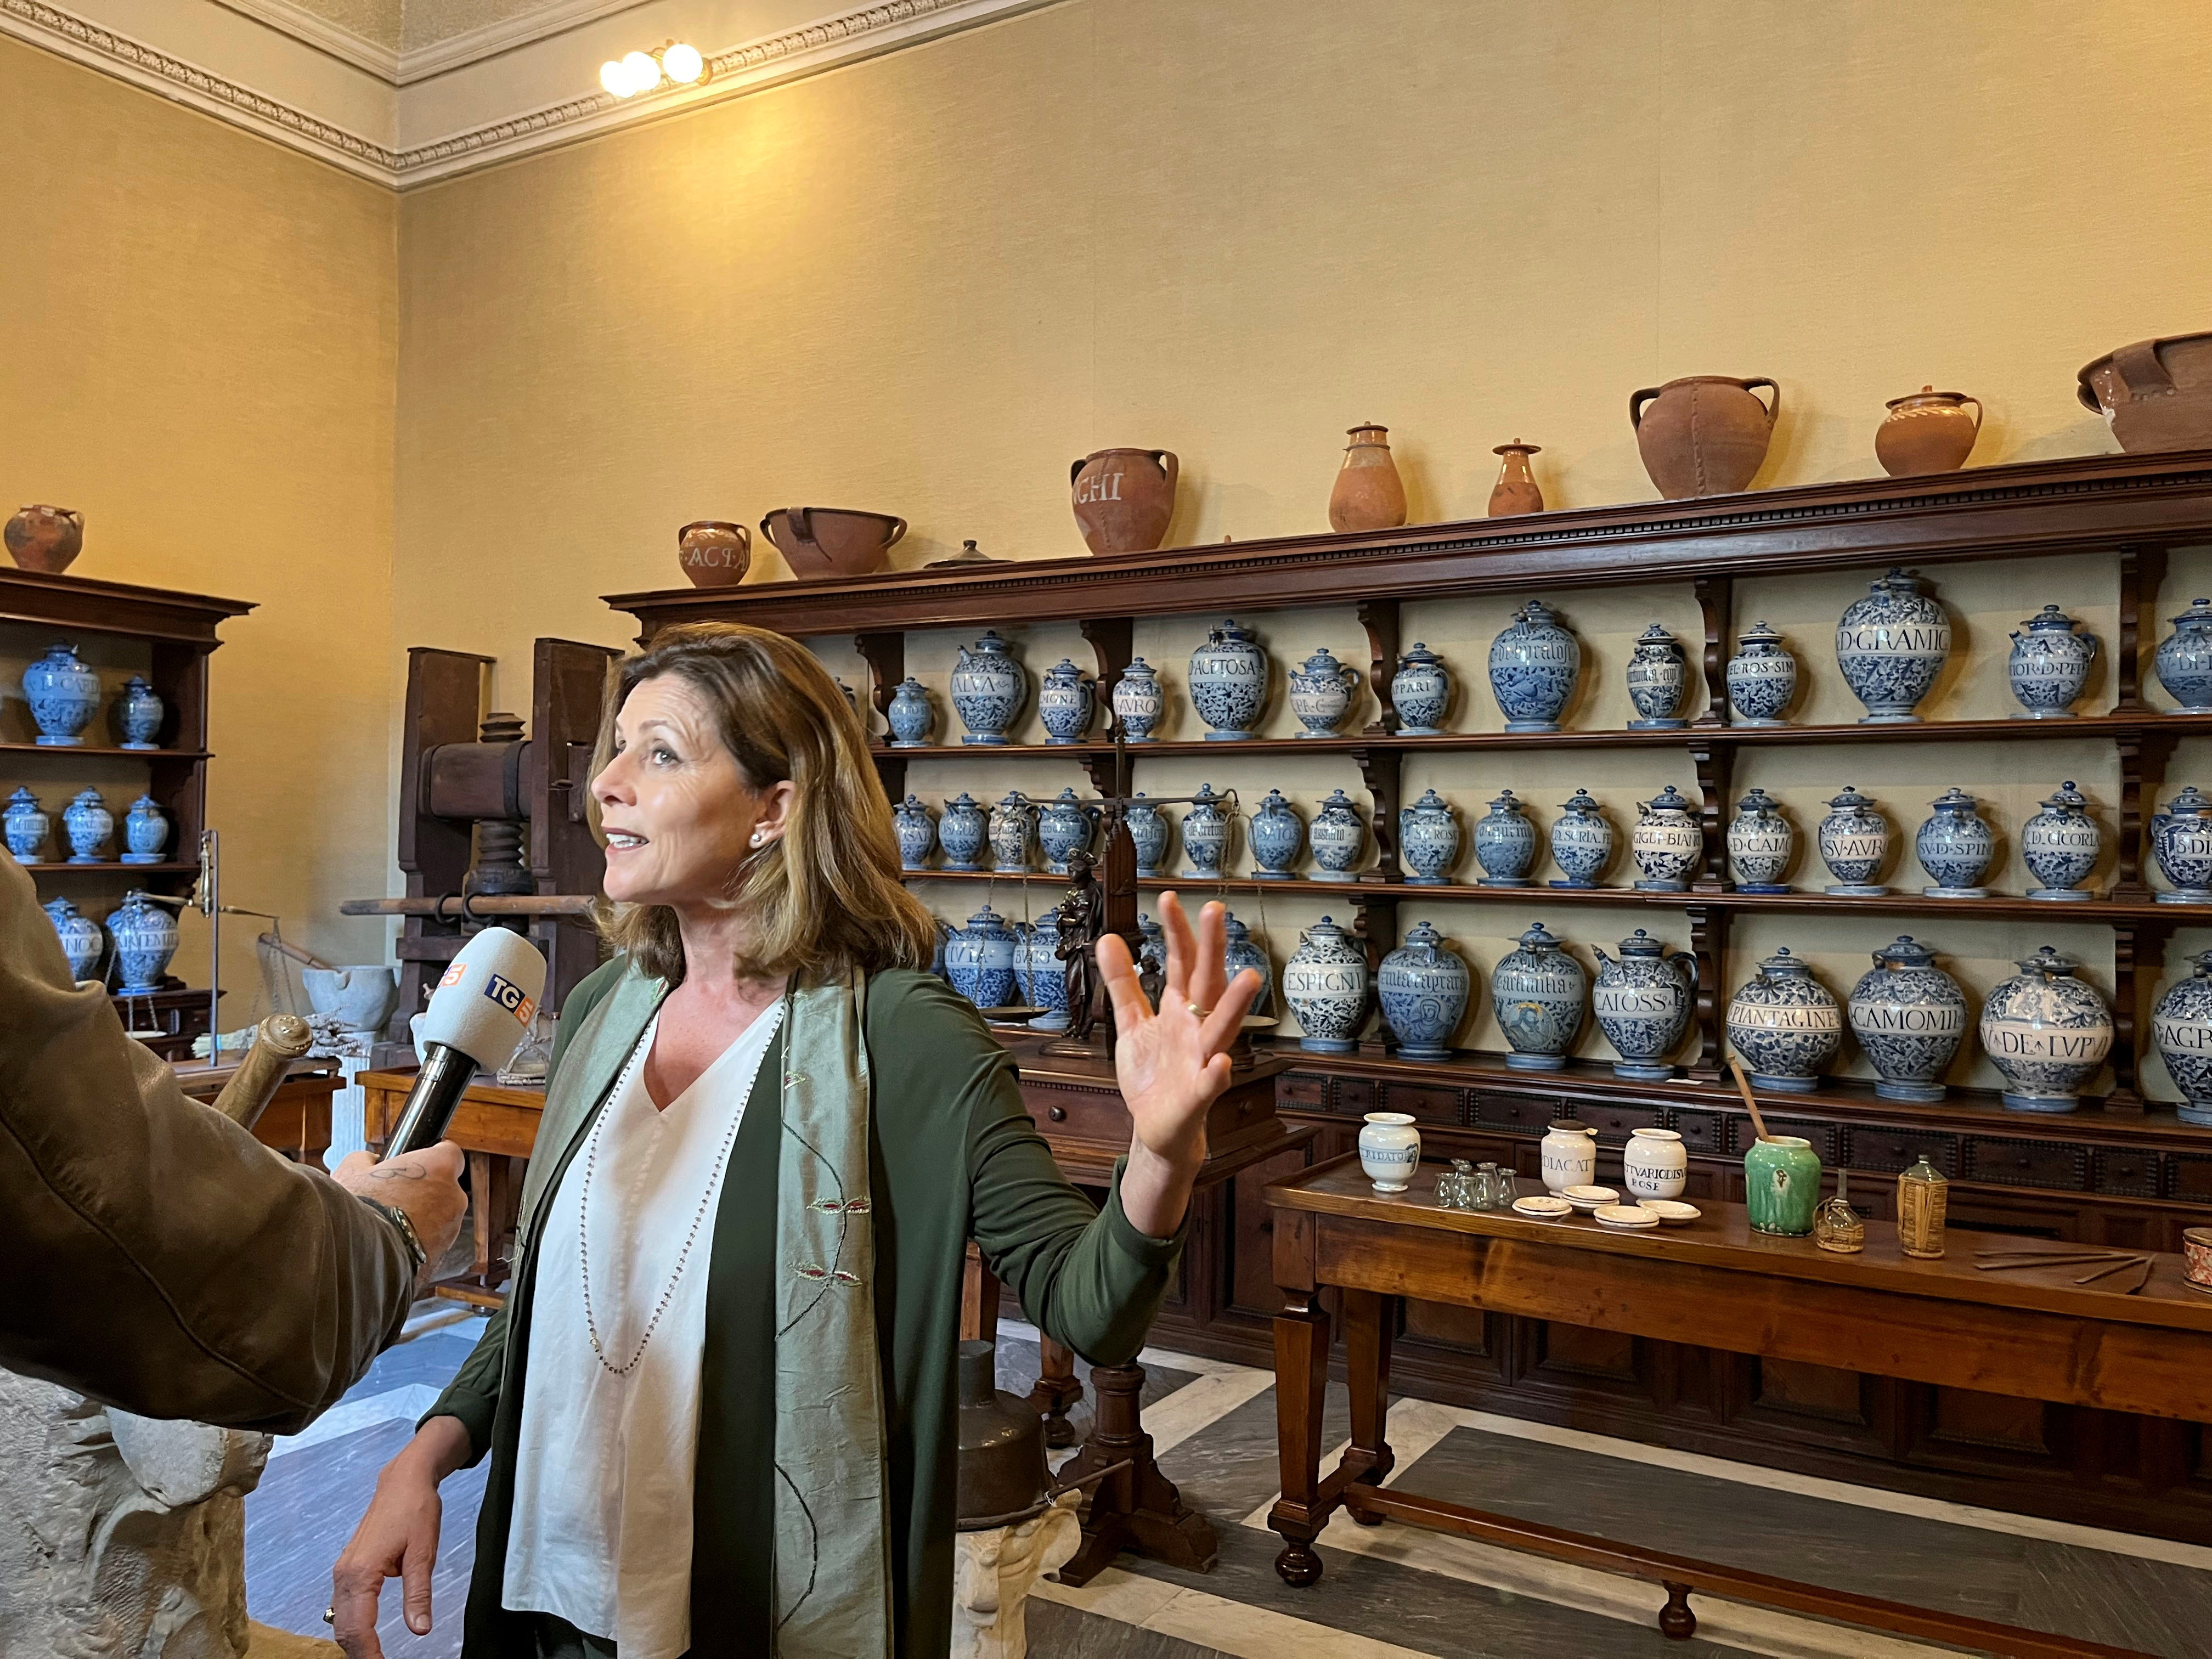 A 17th century pharmacy and apothecary are reassembled for a new exhibition of ceramics in the Vatican Museums